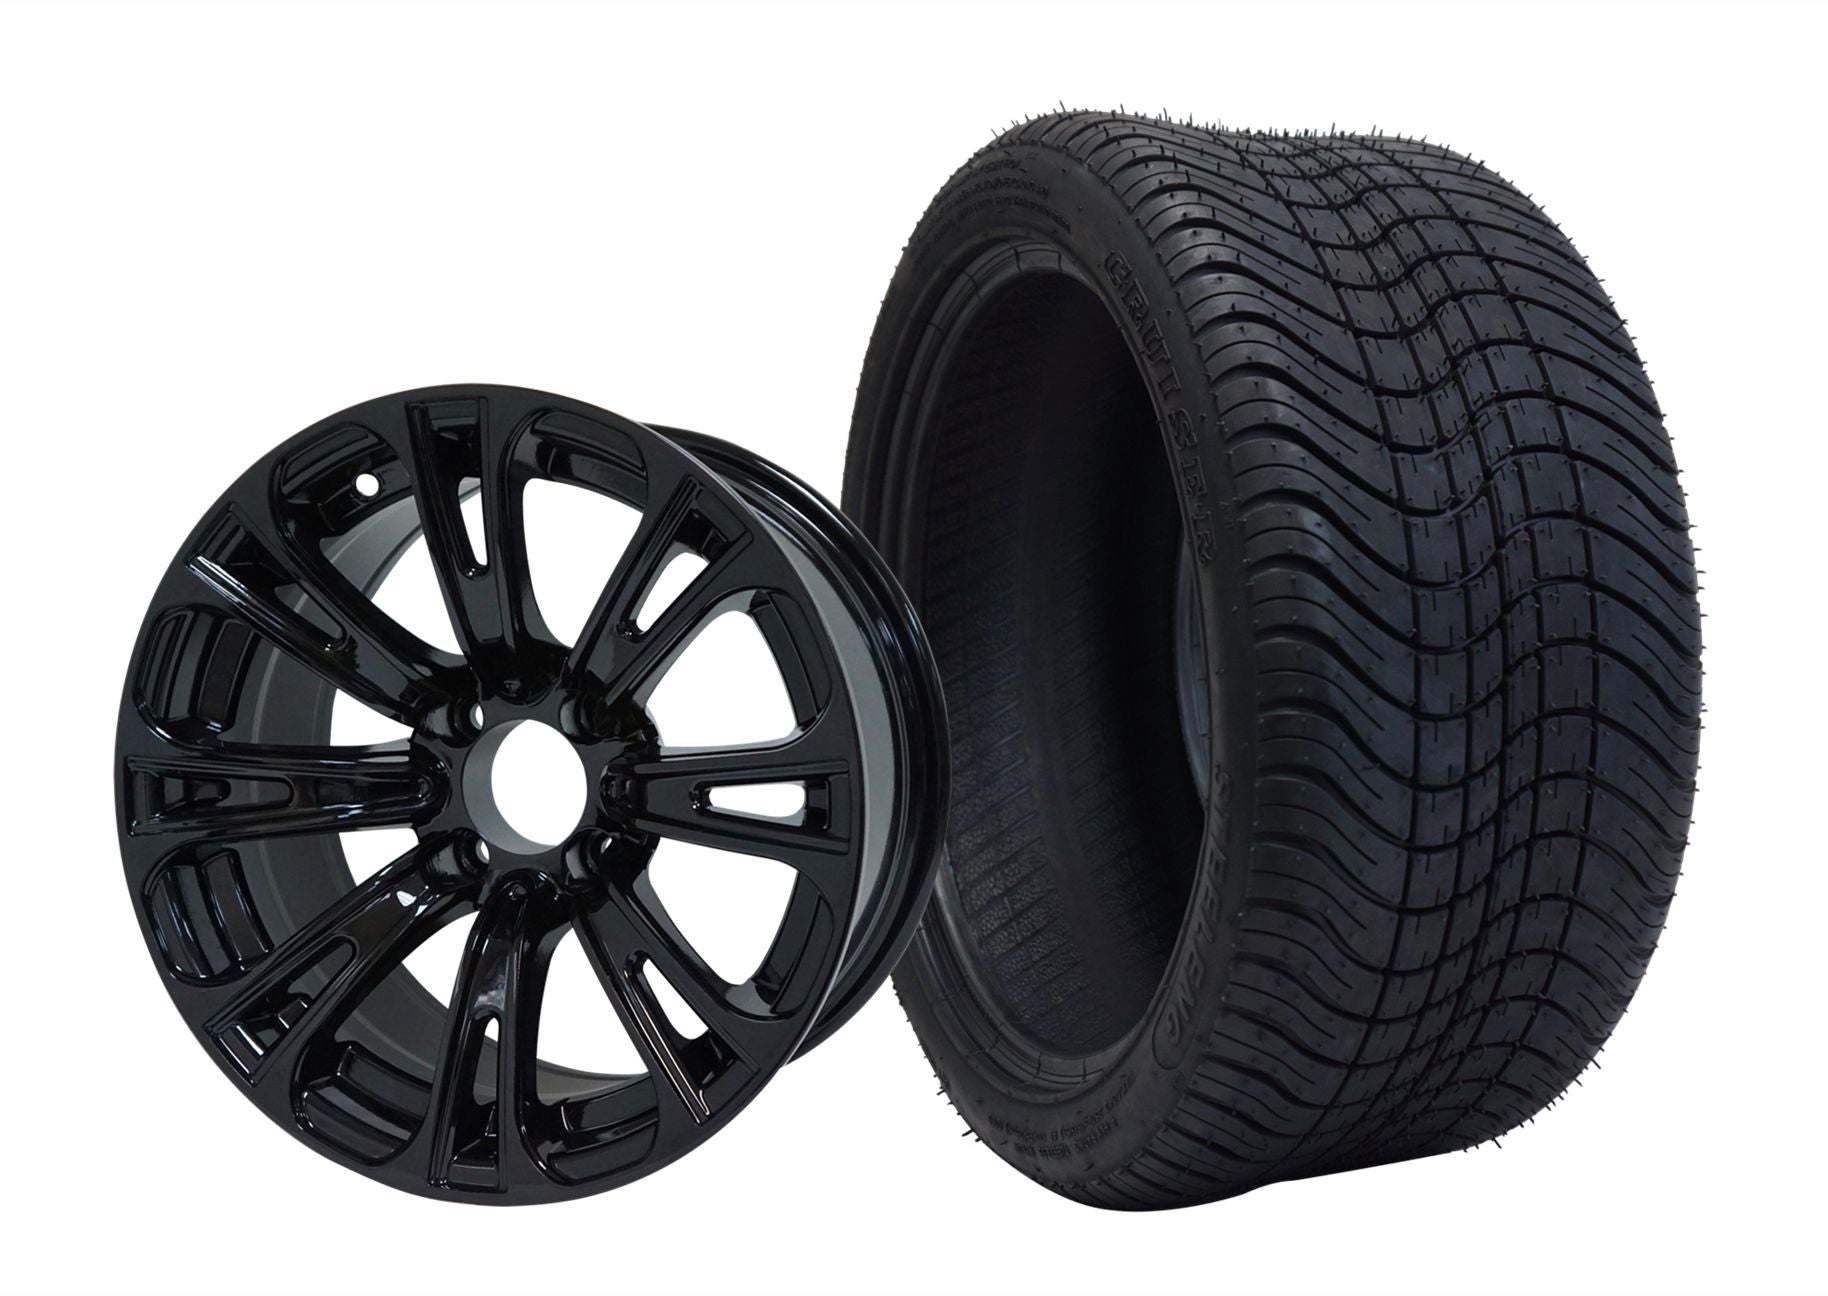 SGC 14" x 7" Voodoo Glossy Black Wheel - Aluminum Alloy STEELENG 205/30-14 Low Profile Tire DOT approved WH1421-TR1404